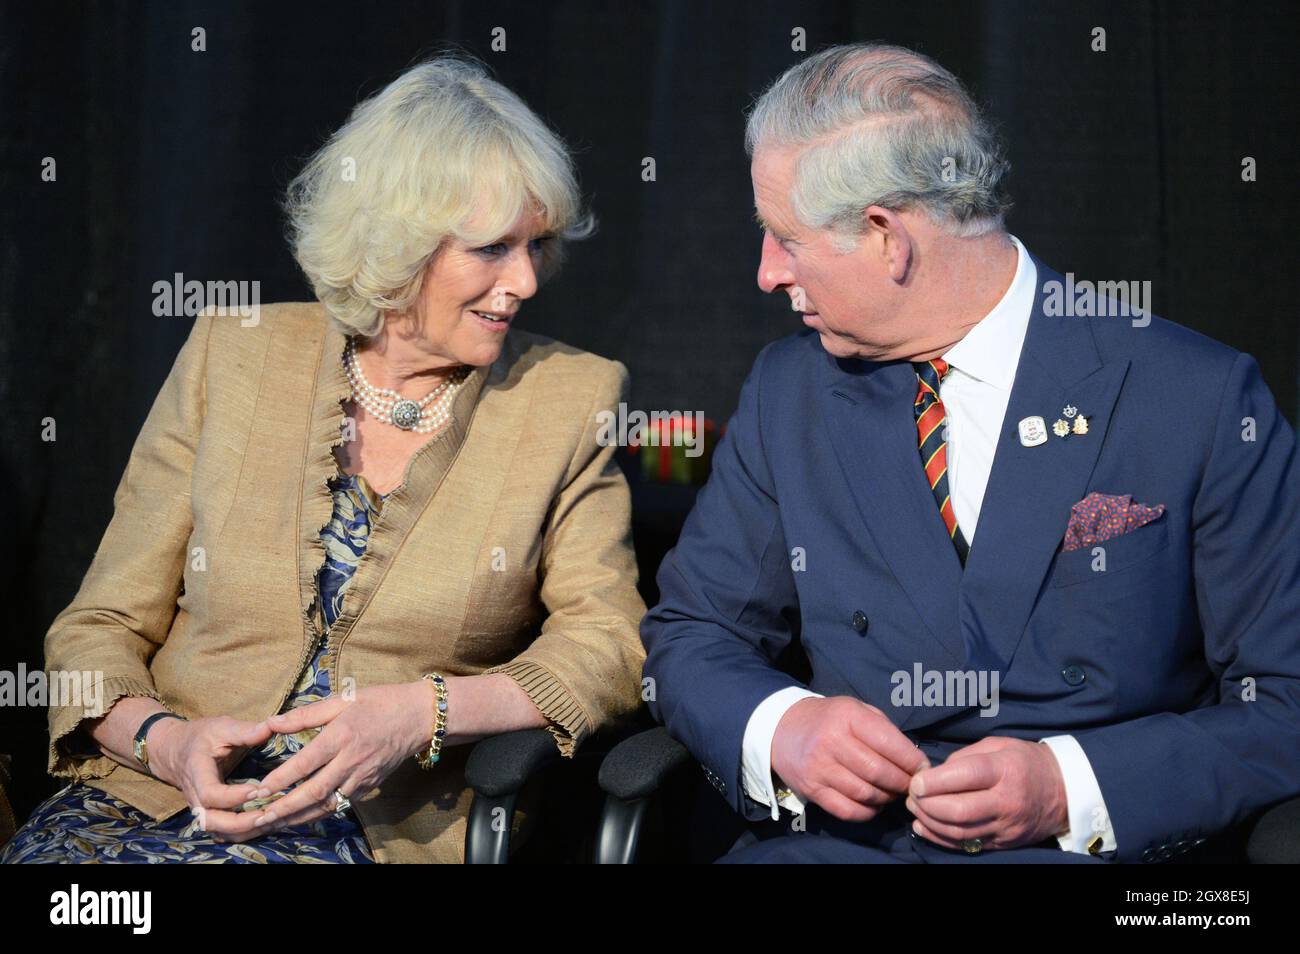 Prince Charles, Prince of Wales and Camilla, Duchess of Cornwall attend a citizenship ceremony in St. John, New Brunswick on the first day of an official Diamond Jubilee tour of Canada Stock Photo